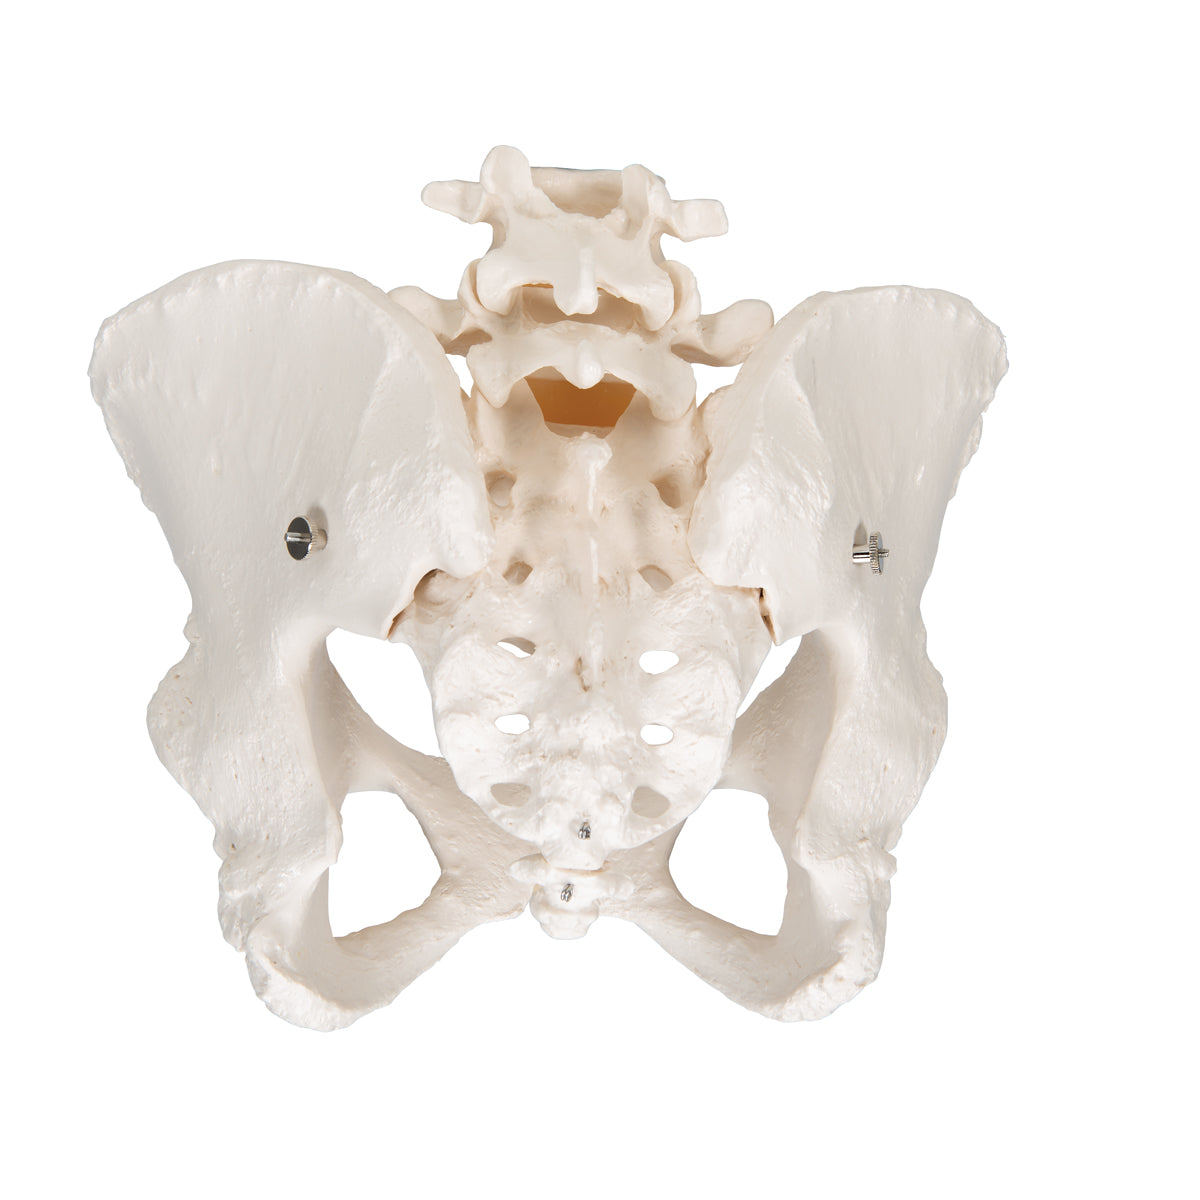 Set of 2 models showing the male and female joints and bones in the pelvis